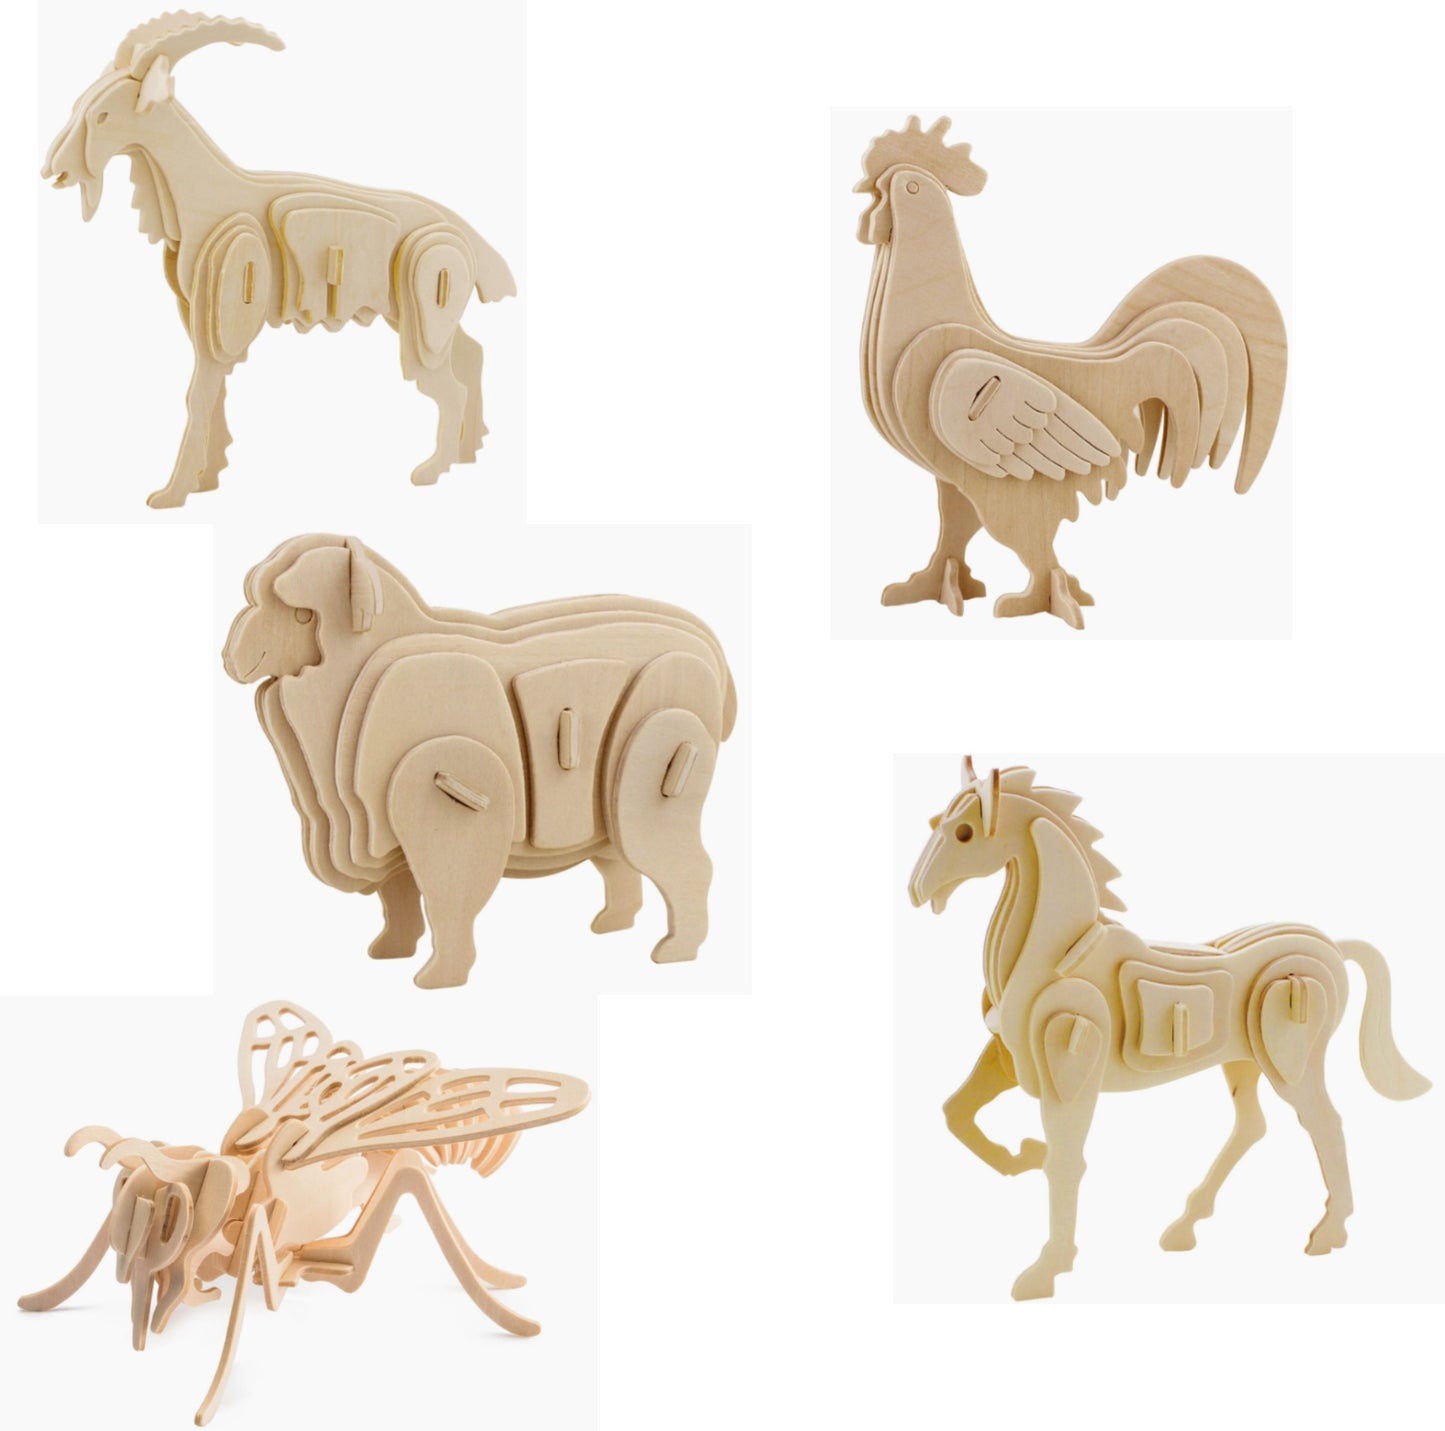 Do-it-yourself 3D Animal Puzzle